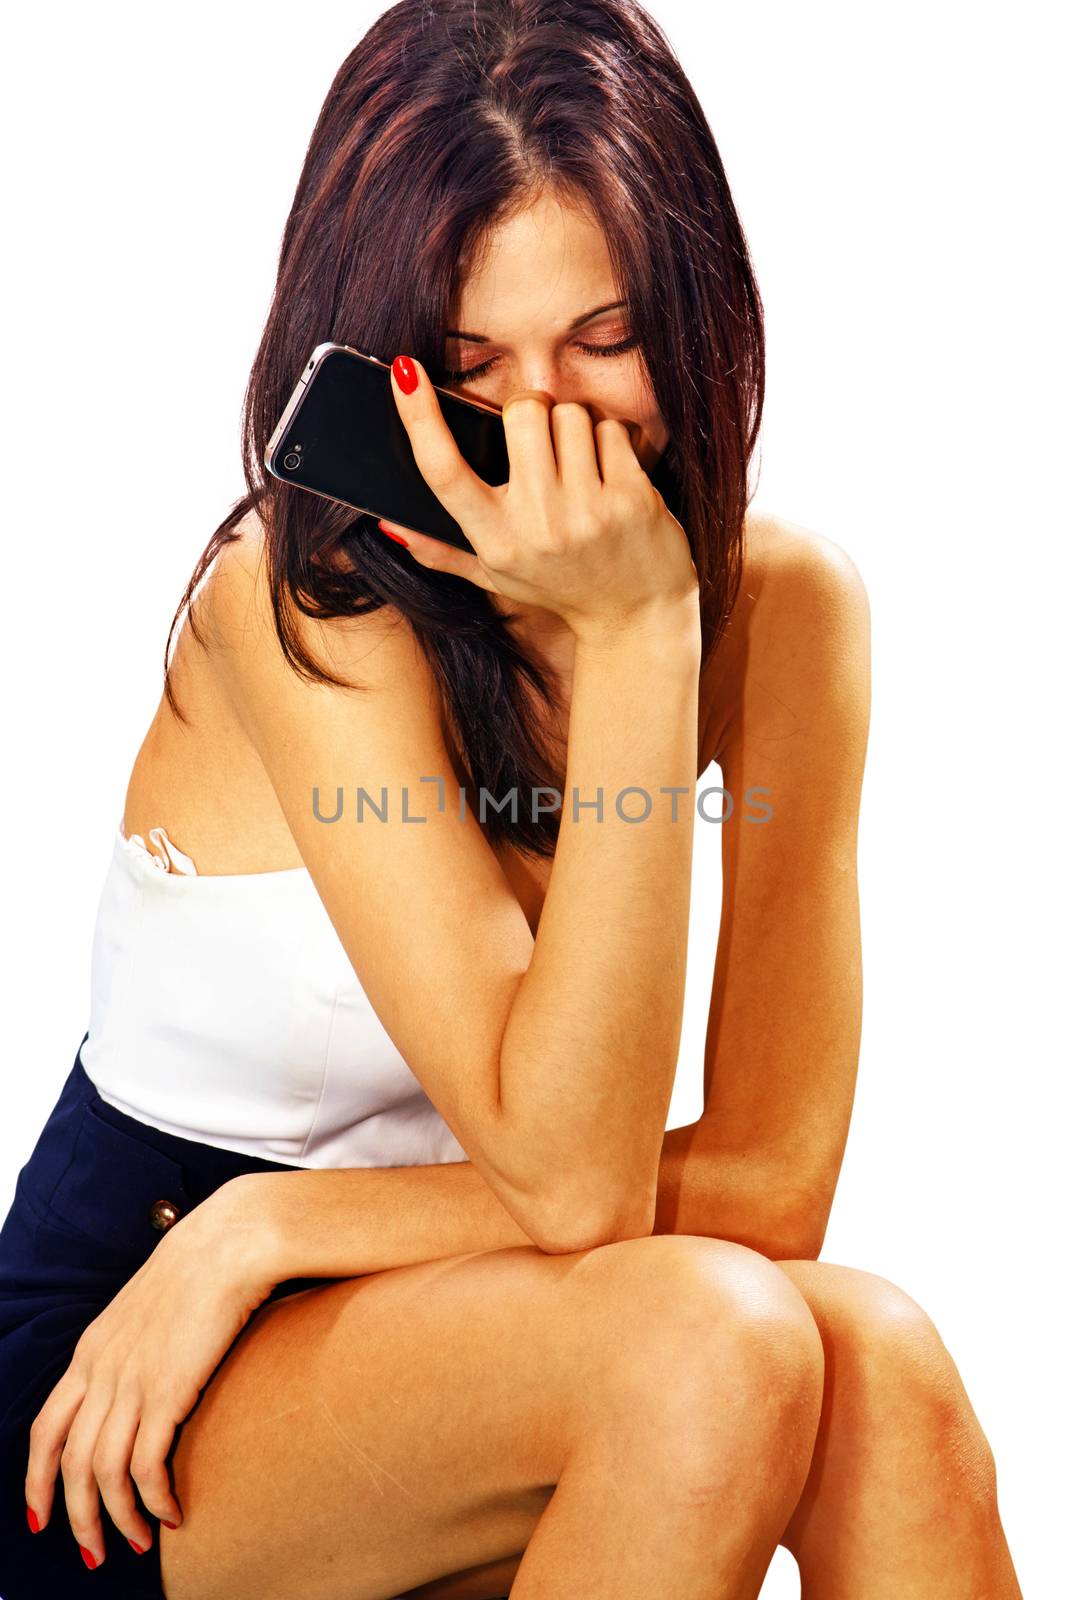 Sad woman with smart phone by ssuaphoto